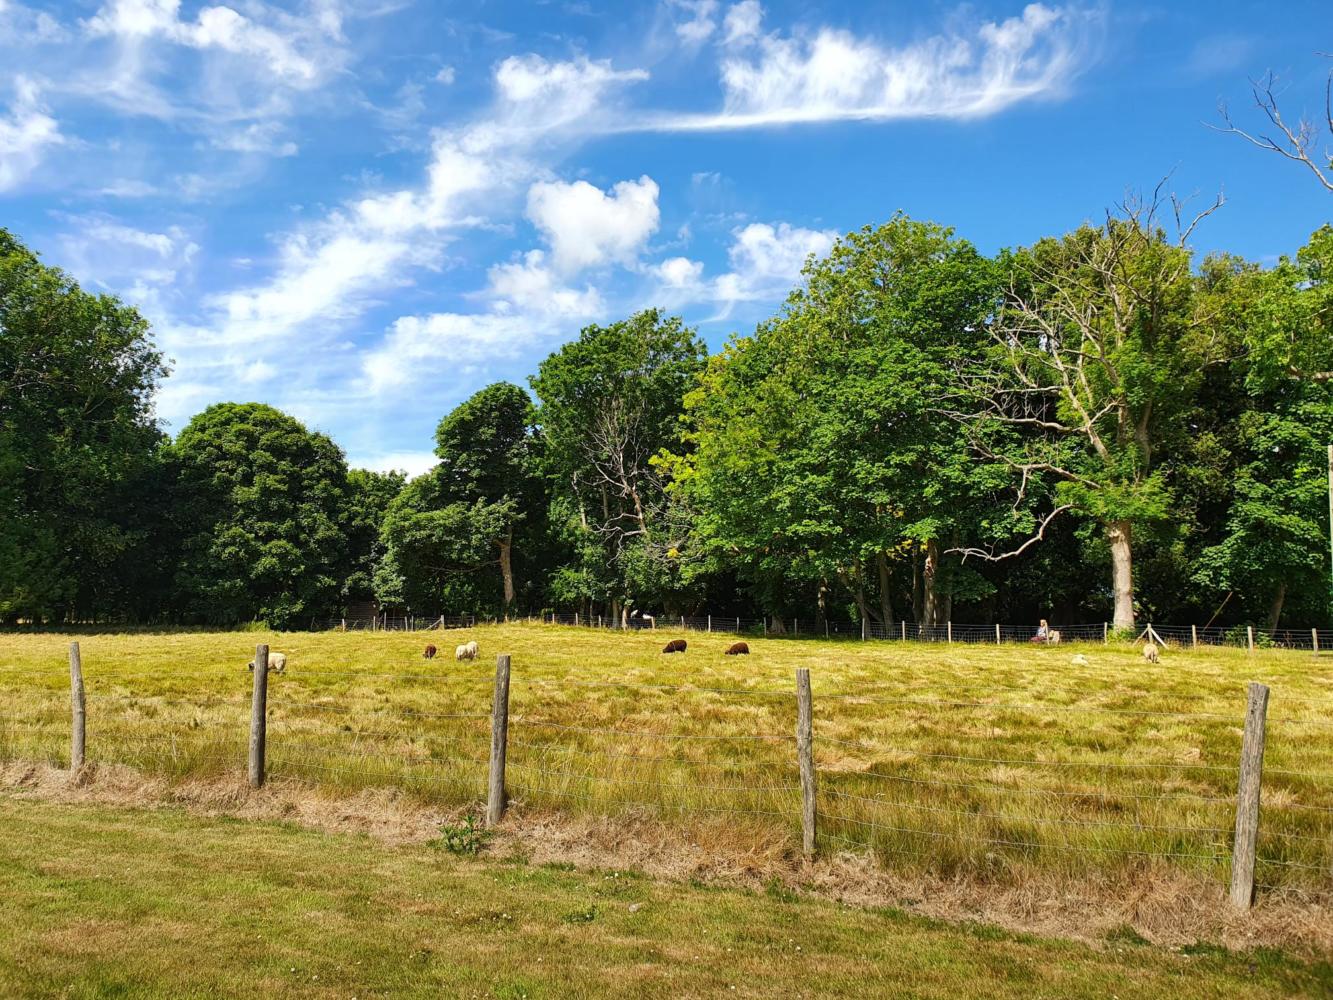 The Glyndley Cottages site showing a fenced-off area for black and white sheep who are grazing on a sunny day under a bright blue sky.